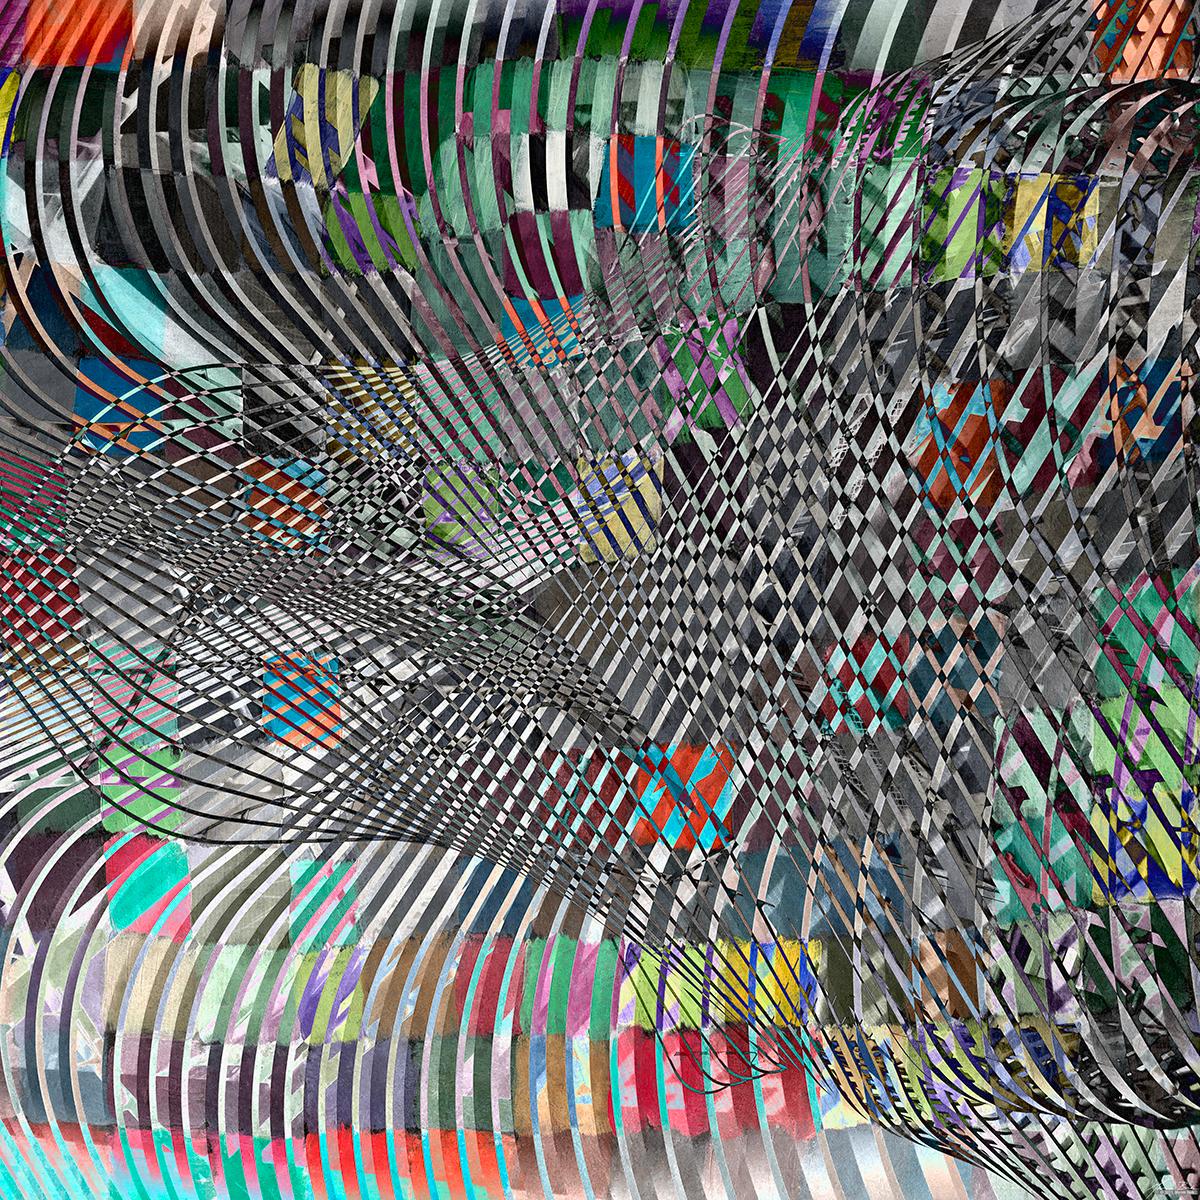 Marvin Berk Abstract Print - "Restructuring Klee #1" - Square digital photomontage with swirls. 